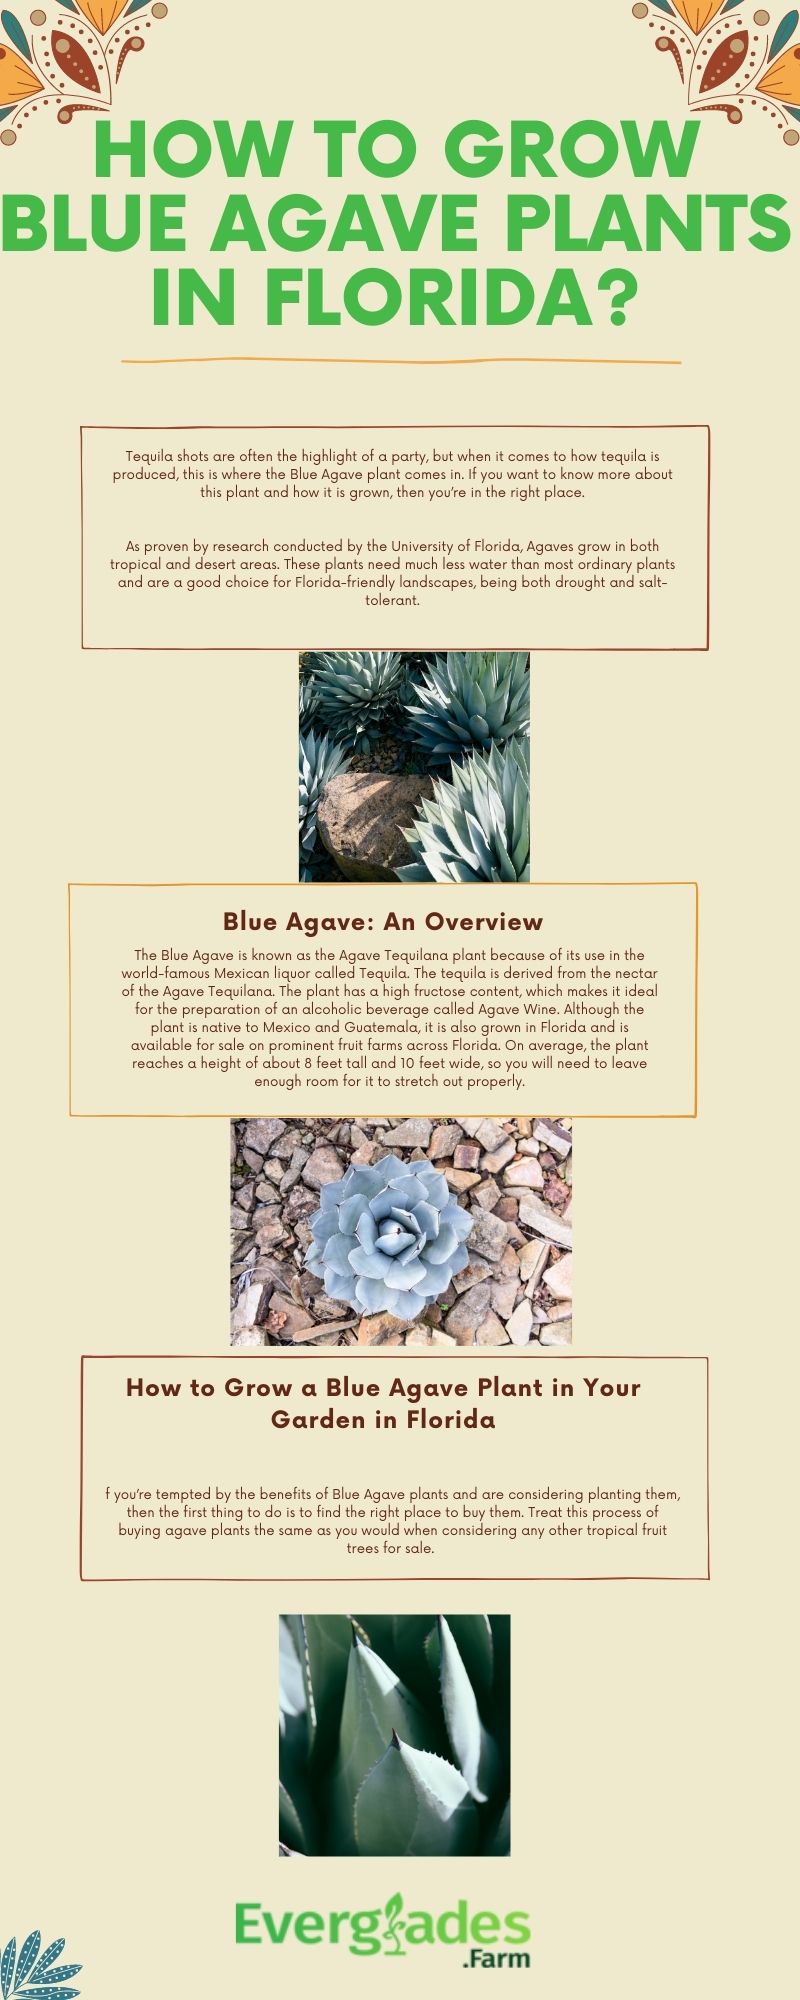 HOW TO GROW BLUE AGAVE PLANTS IN FLORIDA?